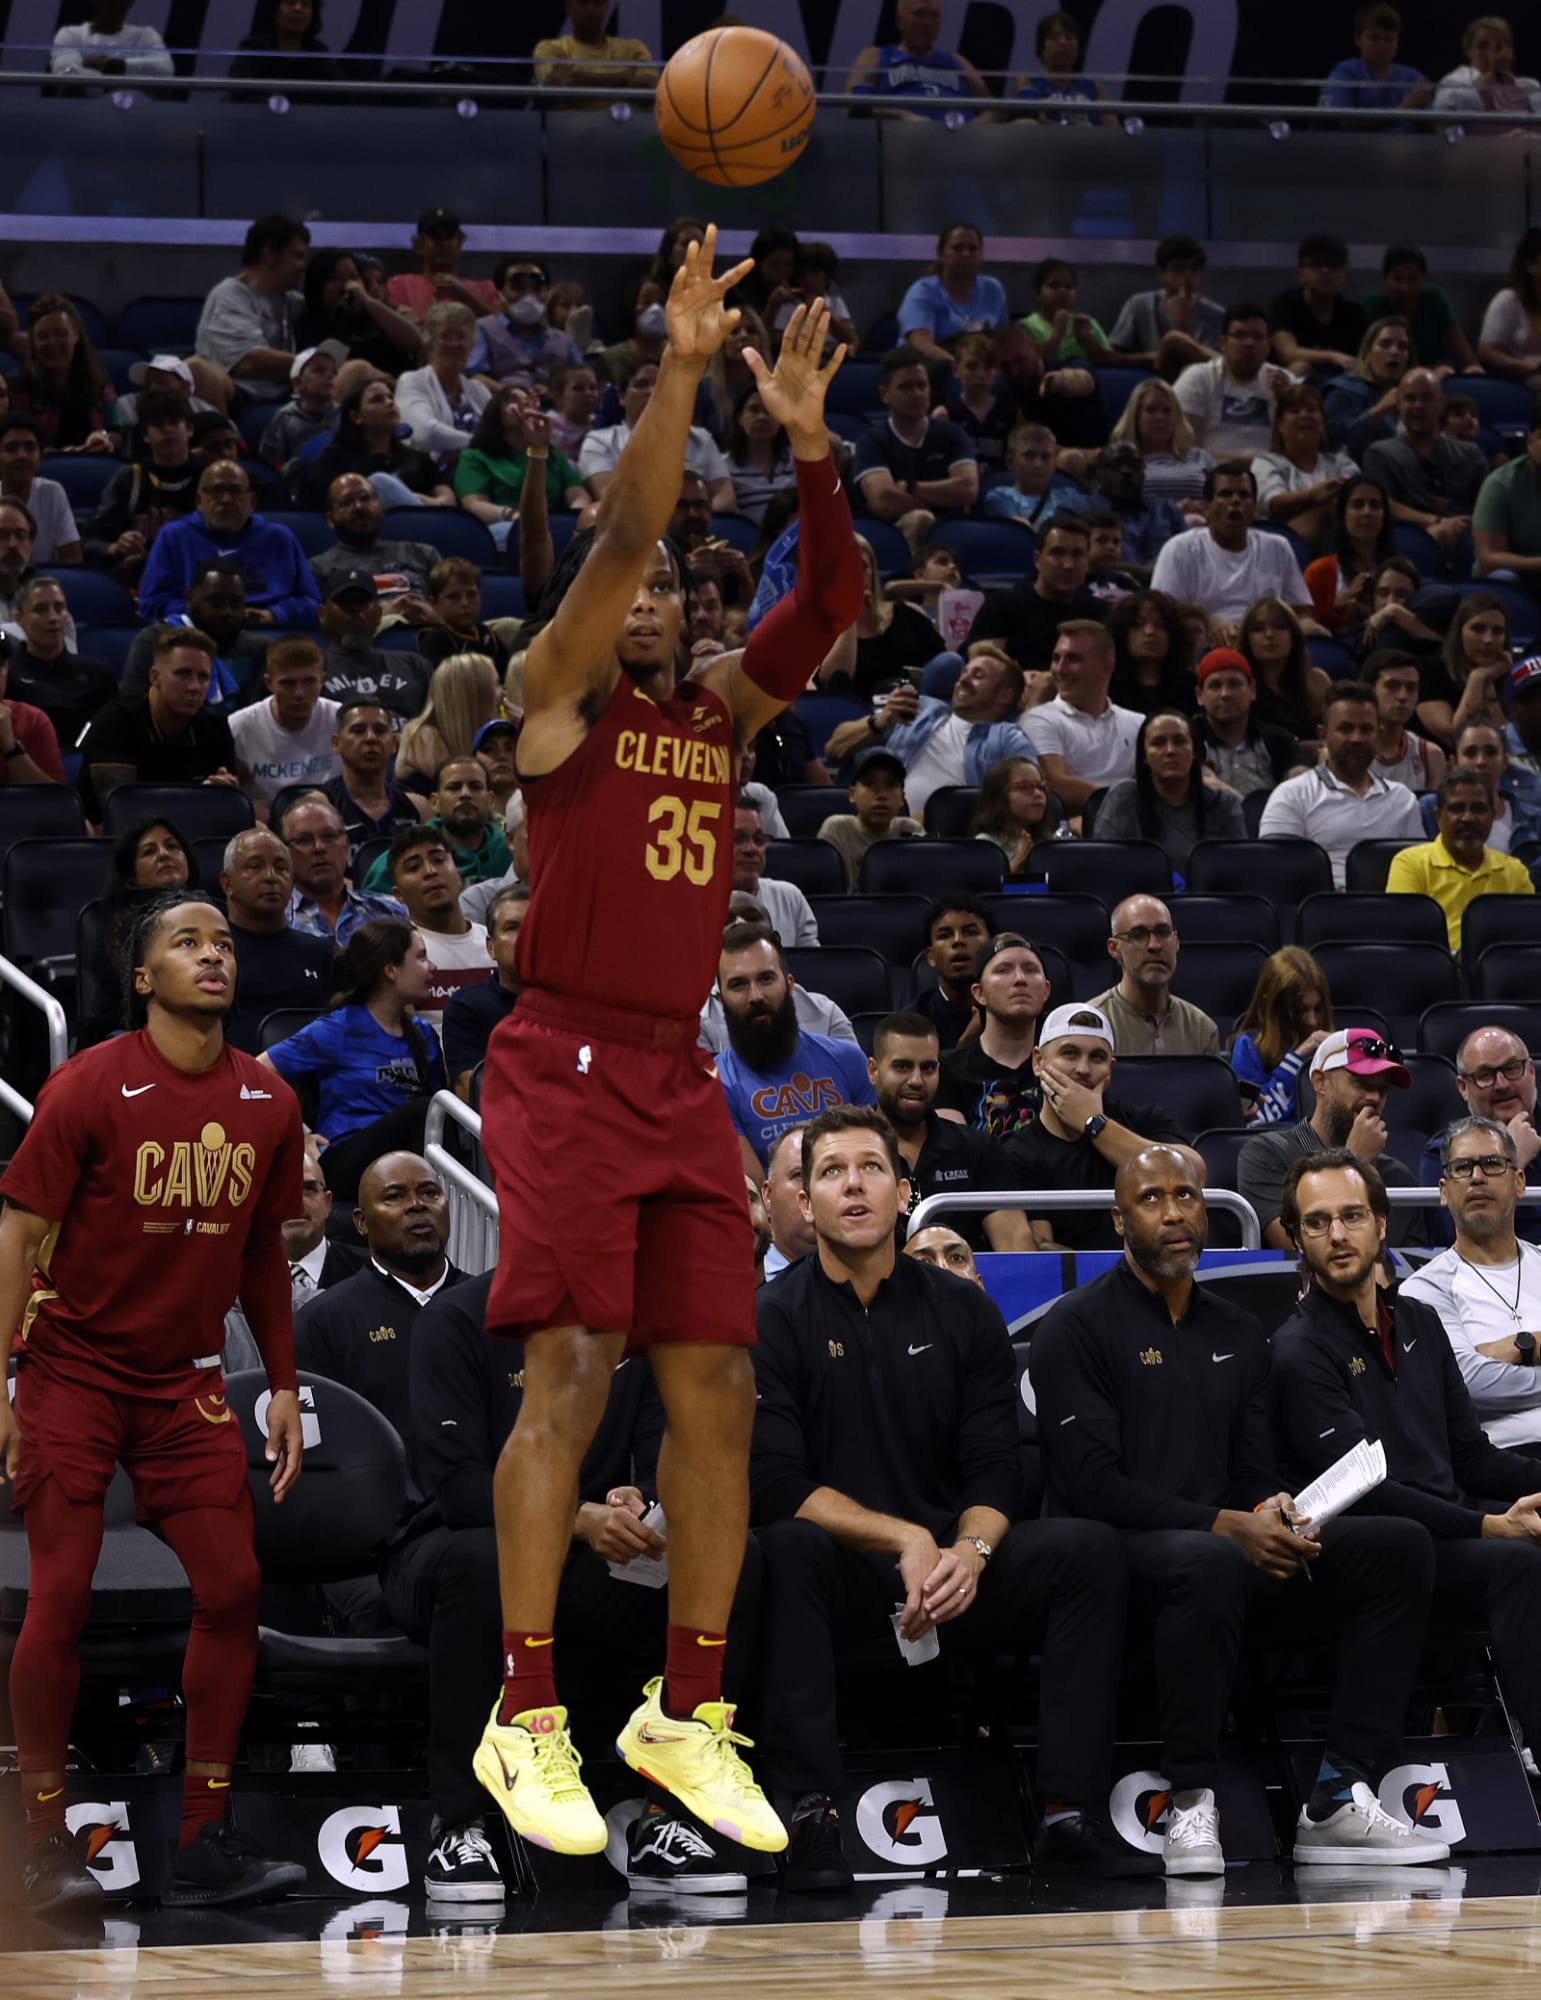 Cavs preseason showed how Okoro can make significant two-way strides